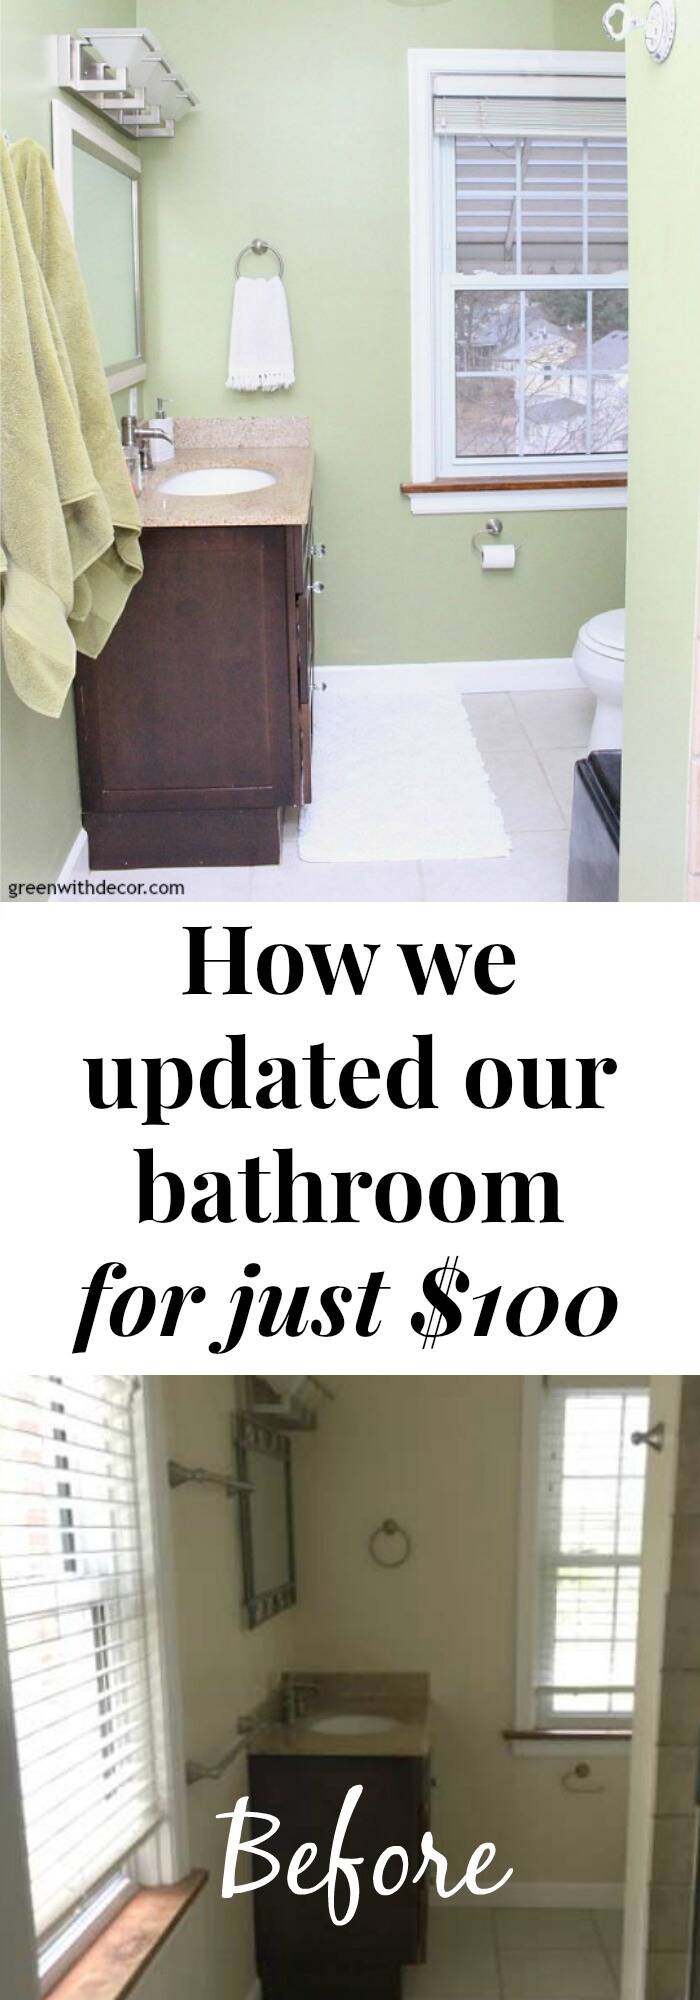 How we updated our bathroom for just $100 - Green With Decor